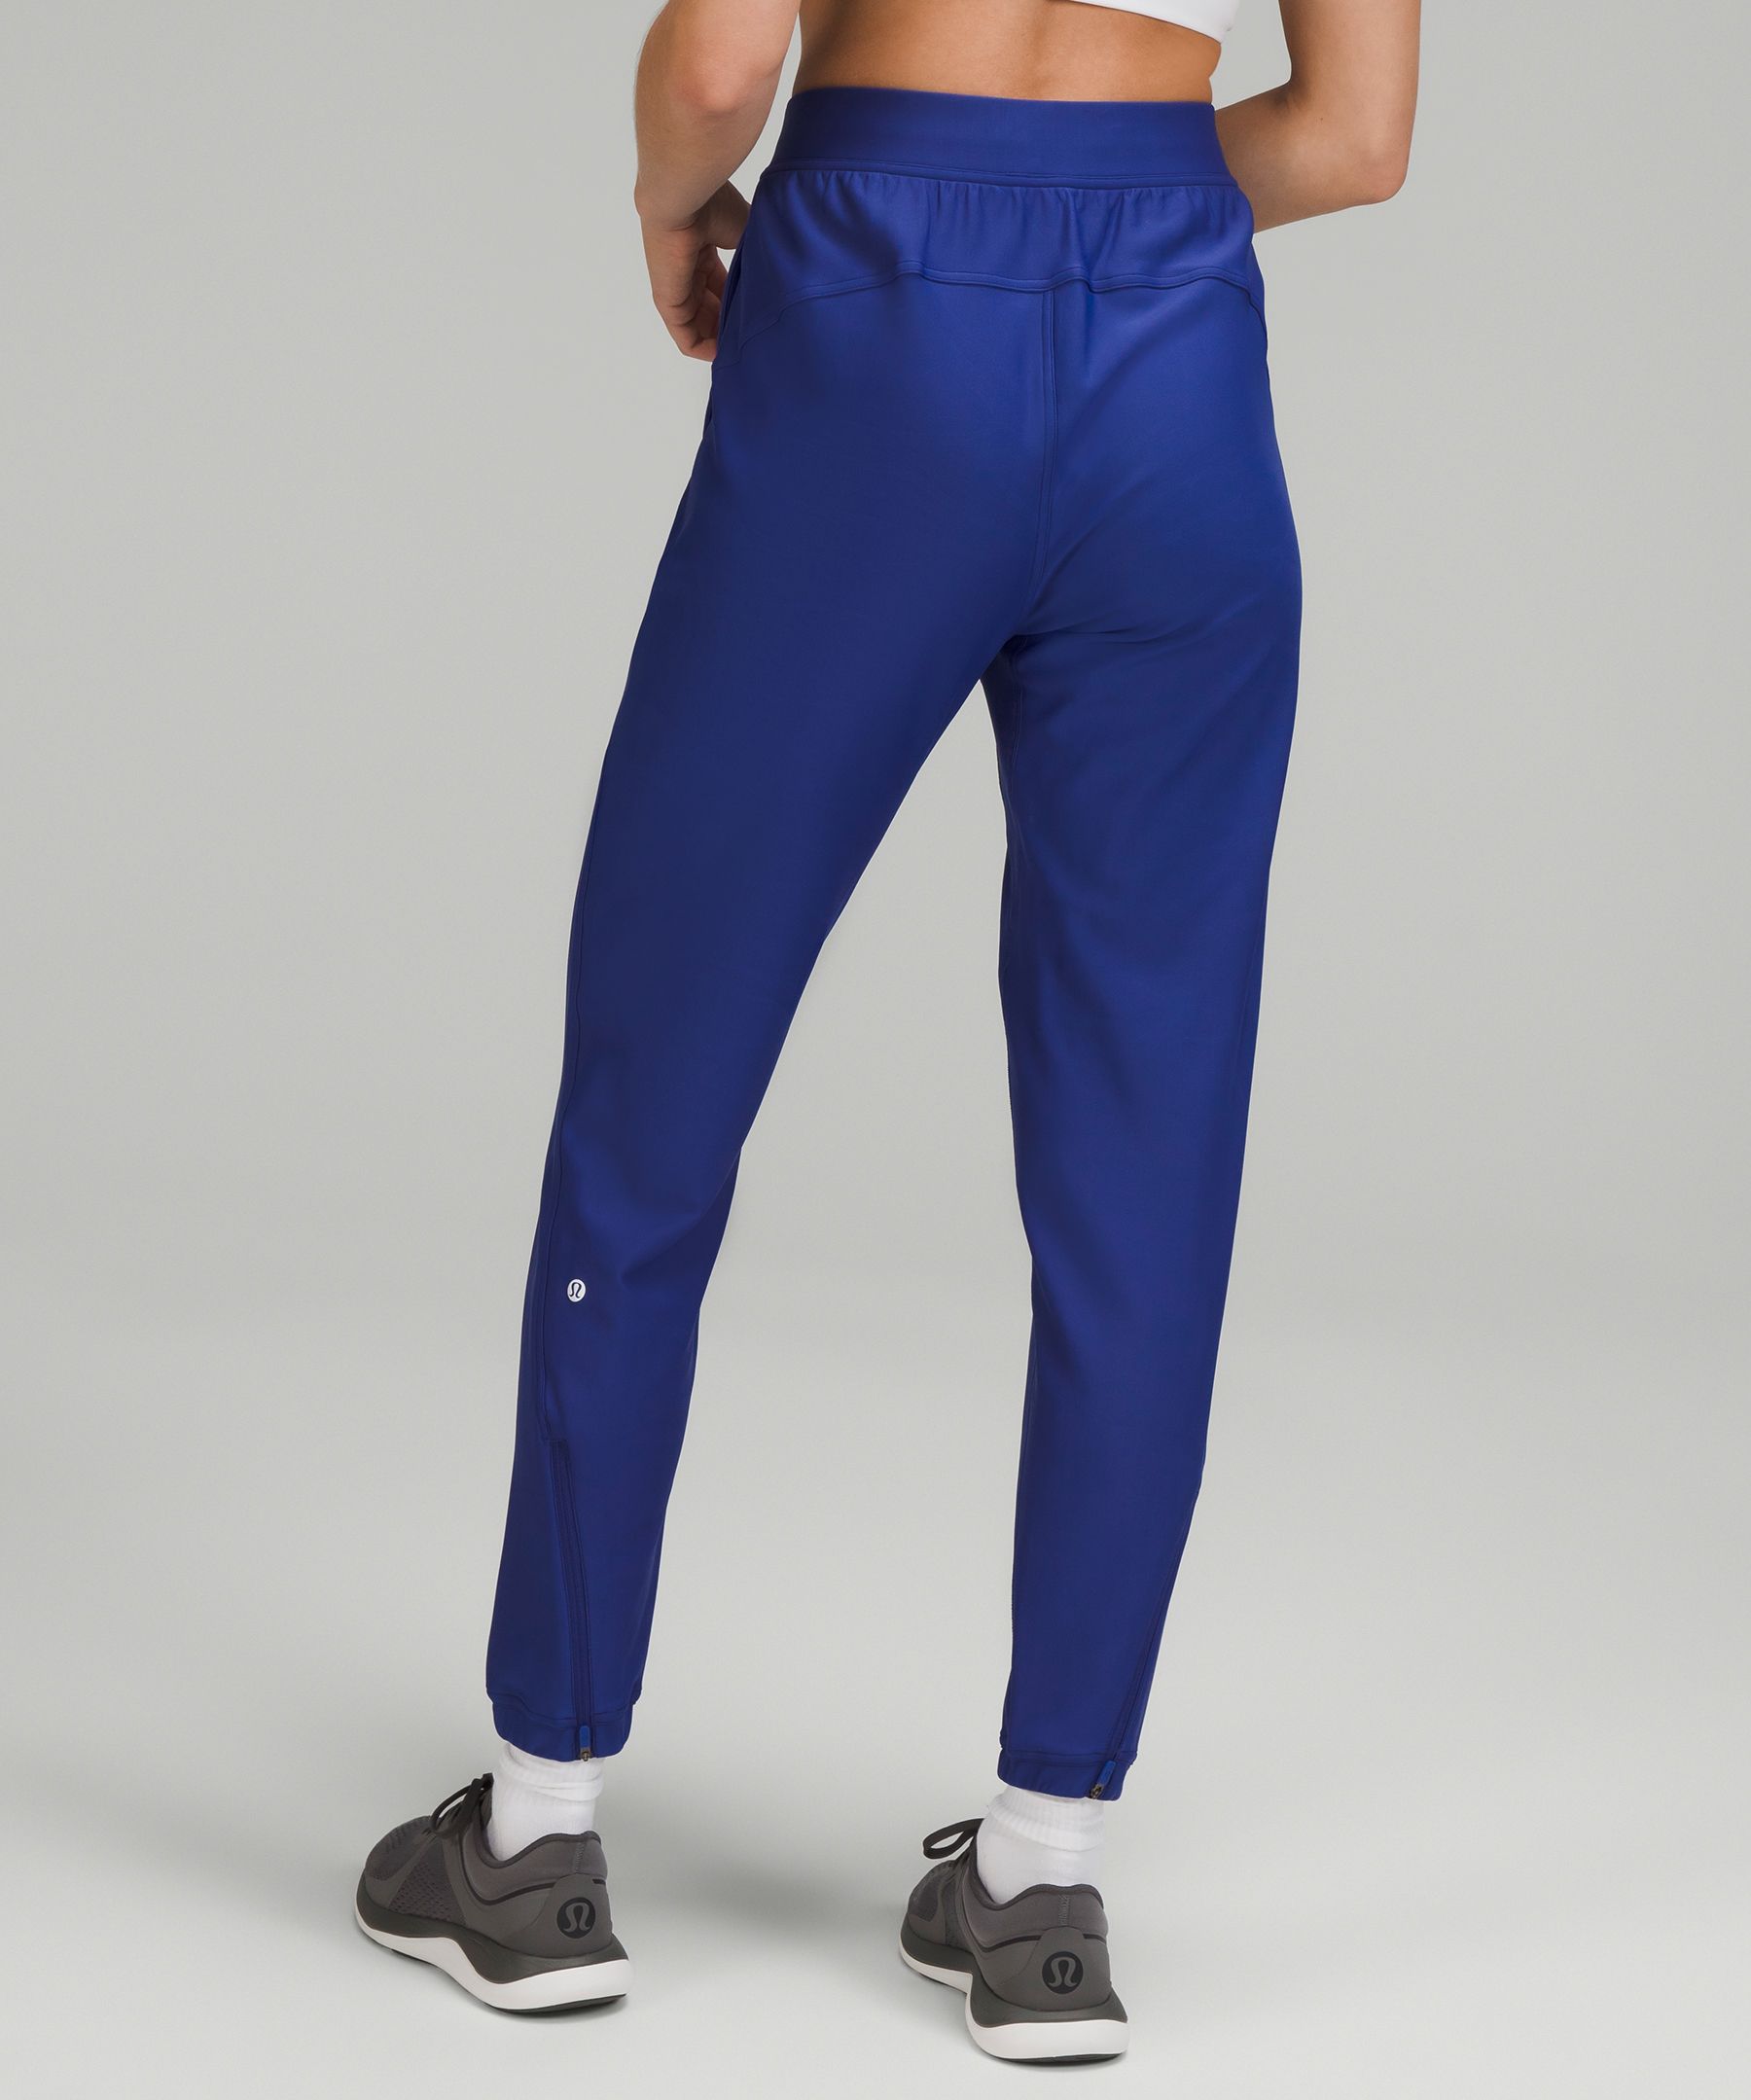 Adapted State High-Rise Fleece Jogger, Women's Joggers